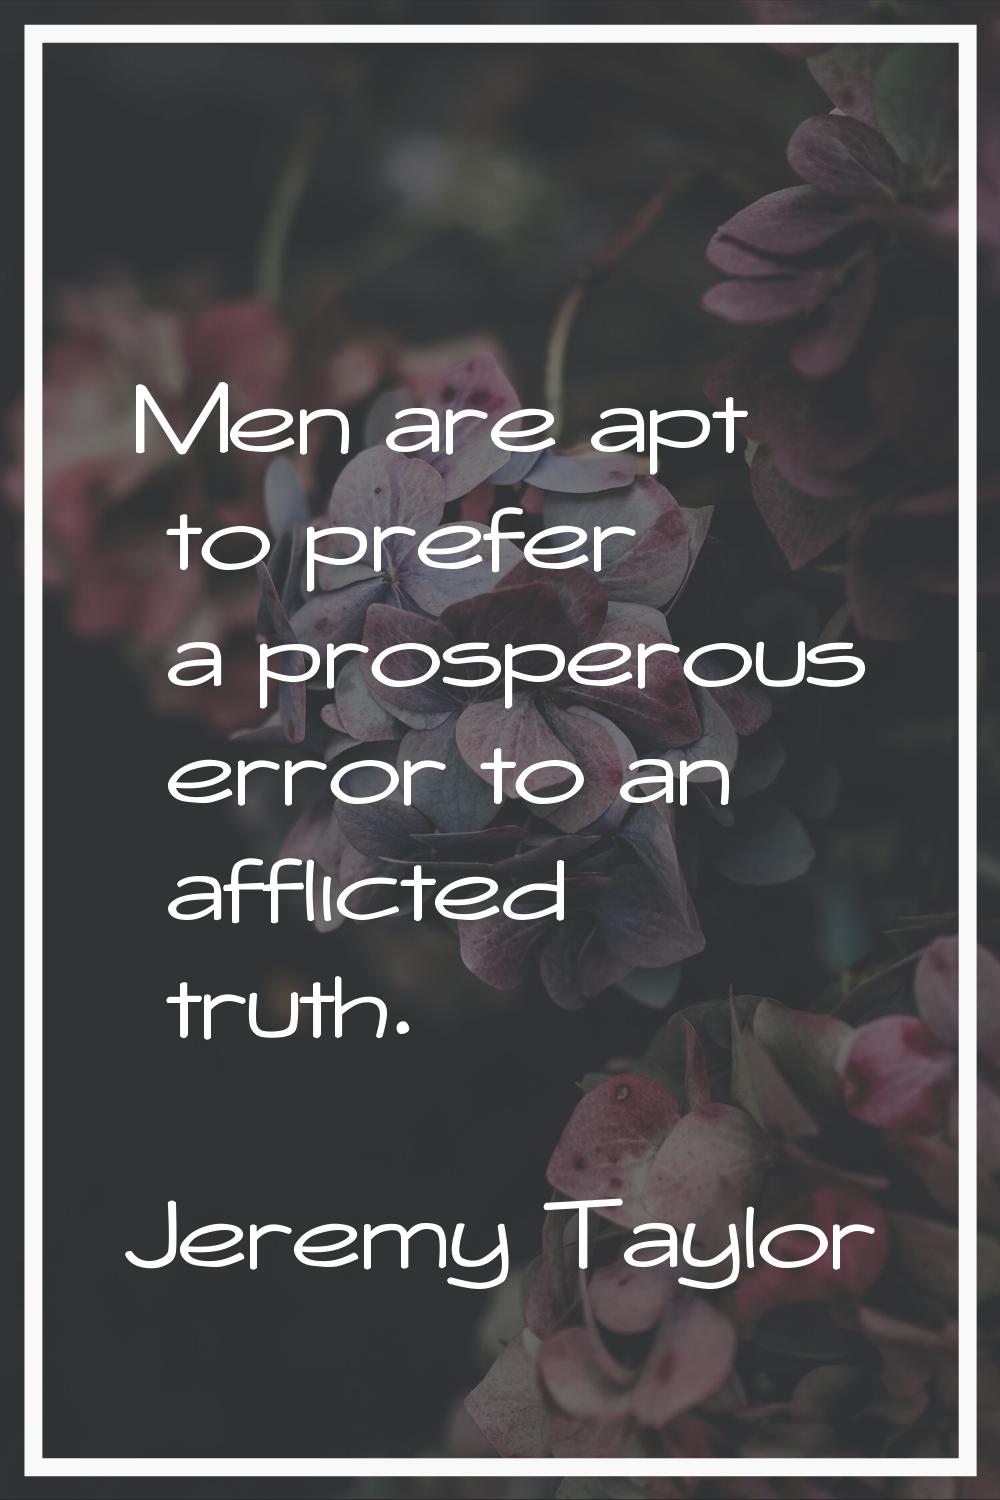 Men are apt to prefer a prosperous error to an afflicted truth.